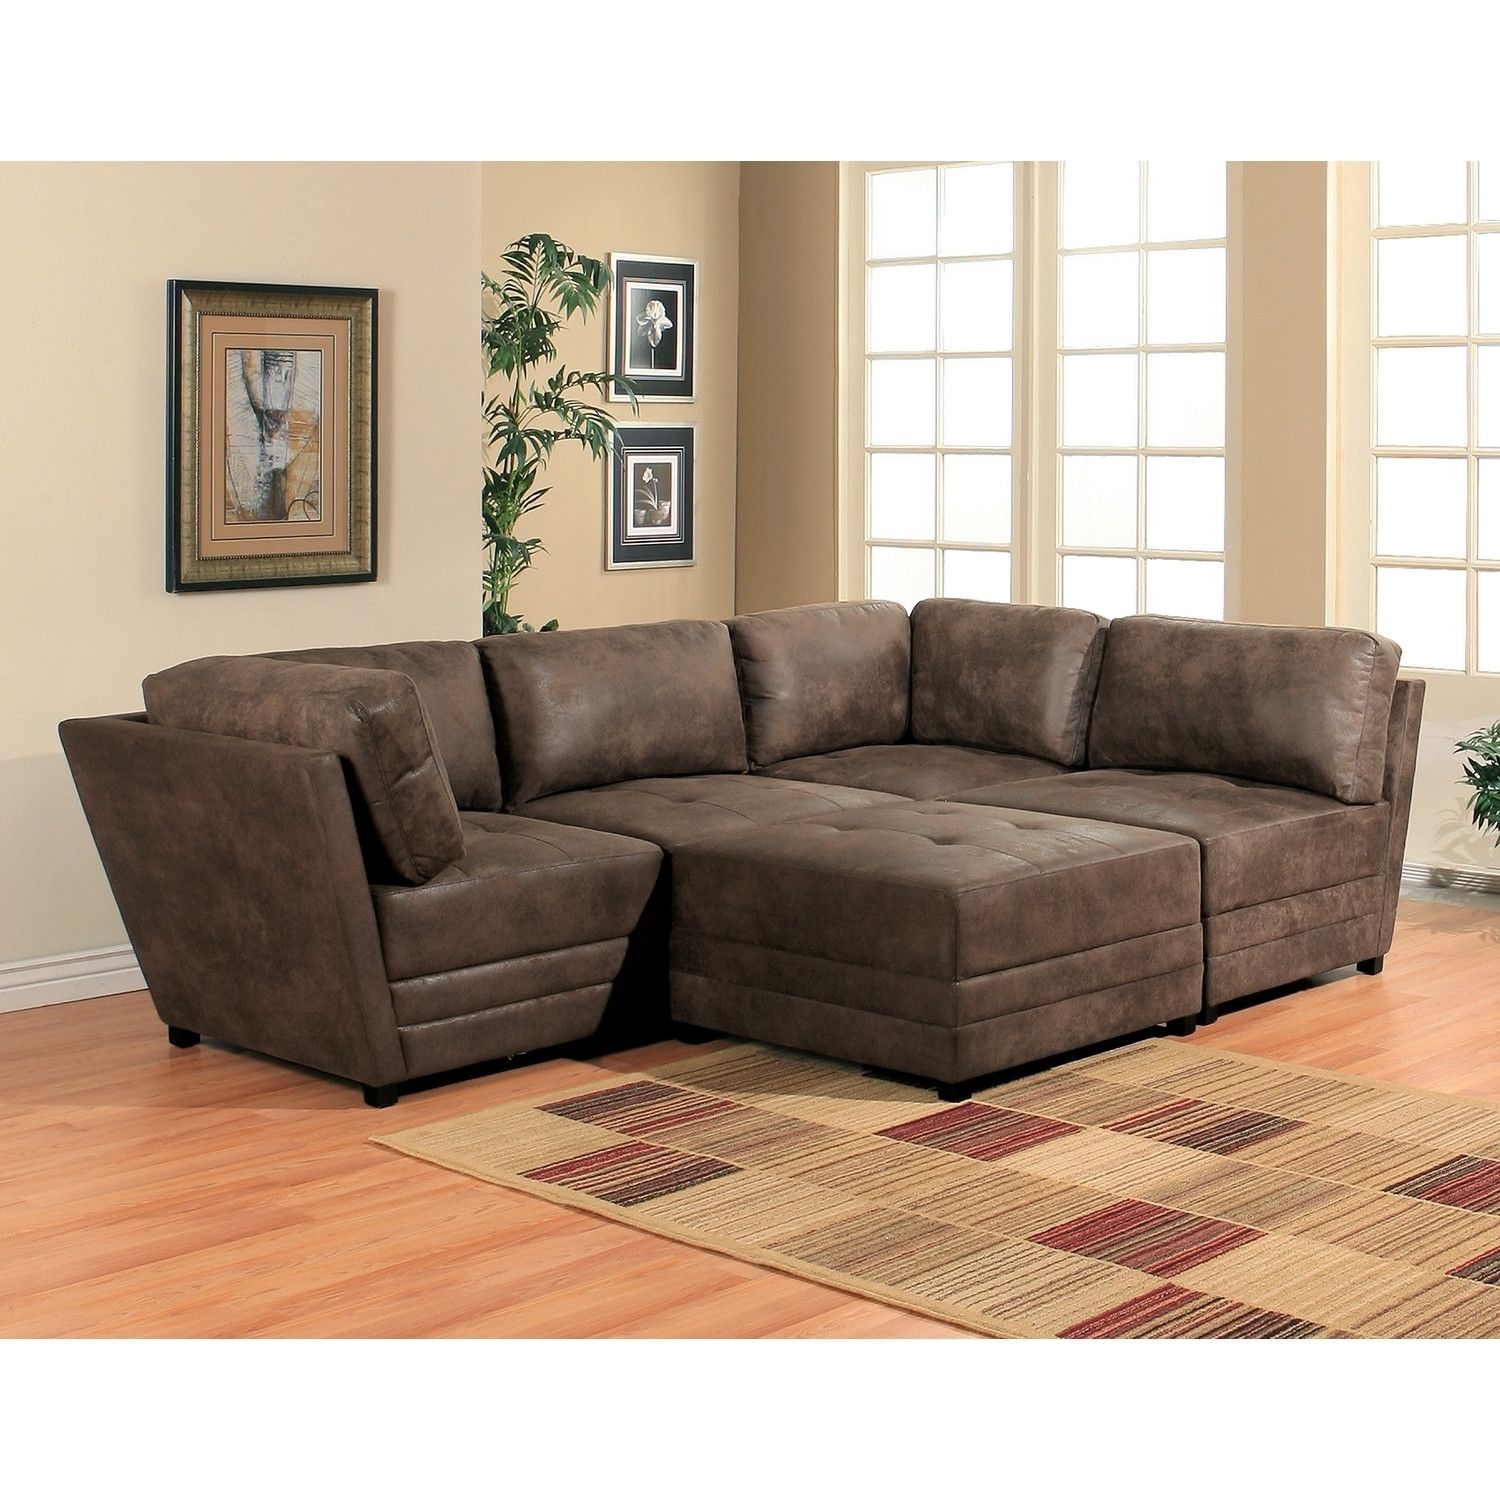 Photos Sectional Sofas Tucson – Buildsimplehome For Tucson Sectional Sofas (Photo 6 of 10)